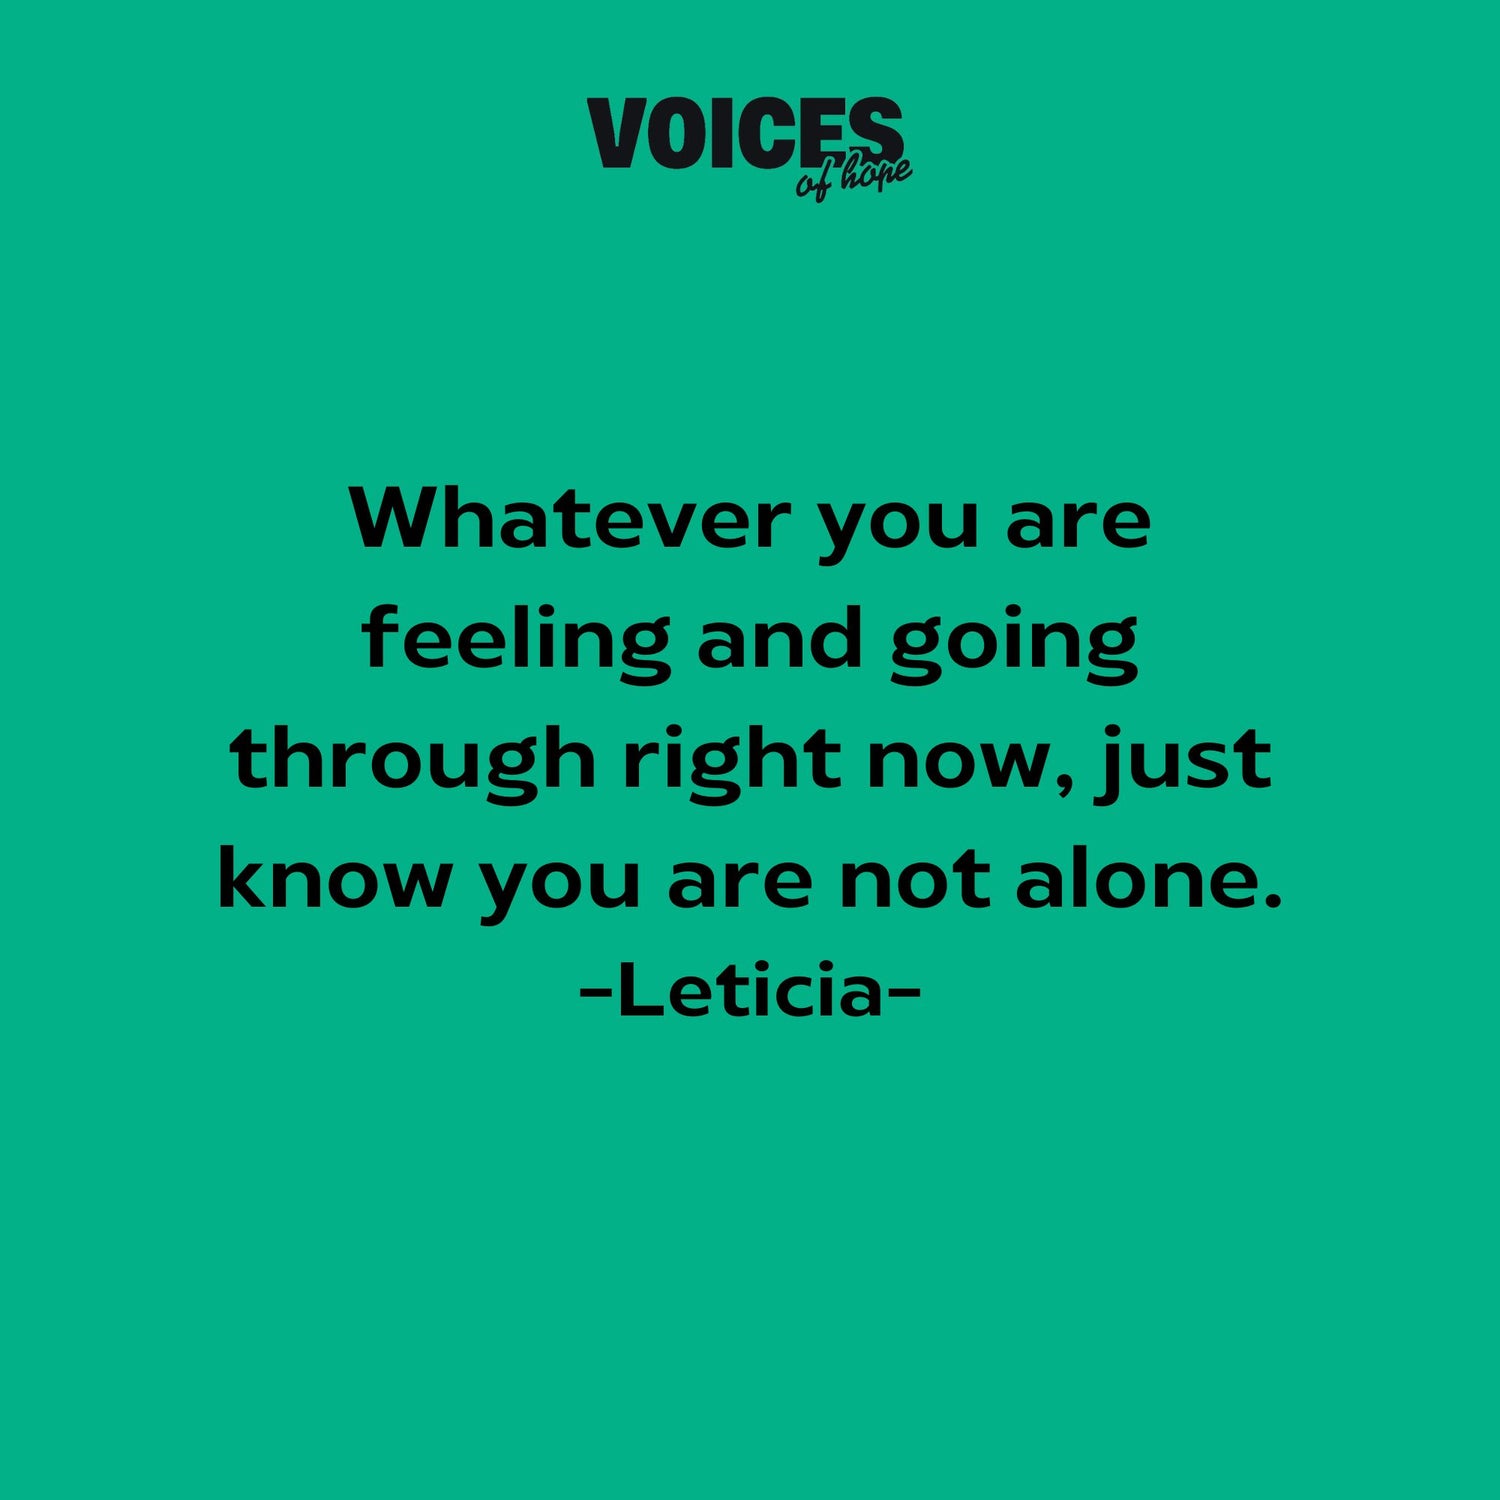 Green background with black writing that reads: "whatever you are feeling and going through right now, just know you are not alone. Leticia."